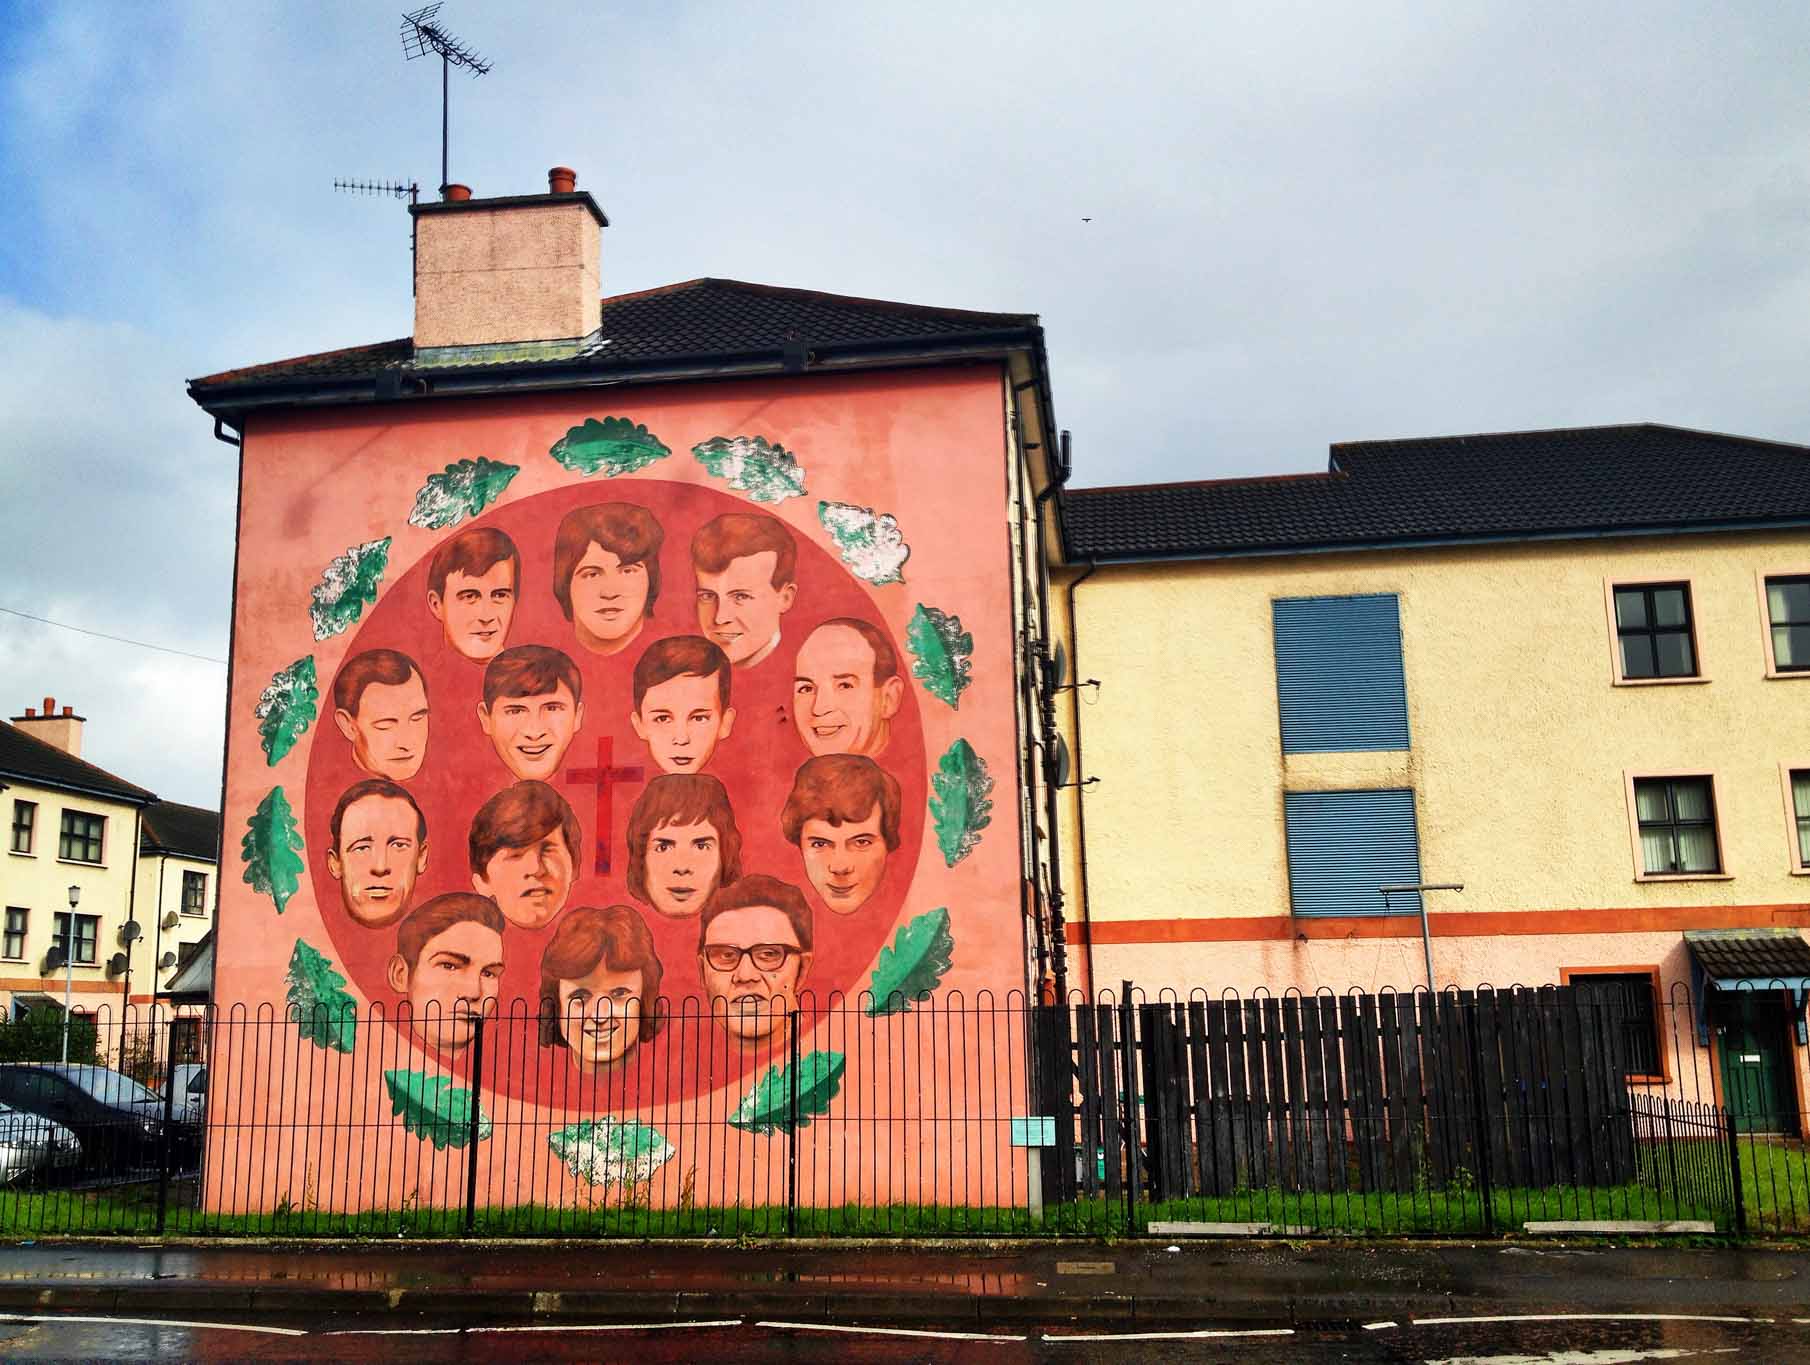 Mural with faces in a red circle memorializing the victims of Bloody Sunday